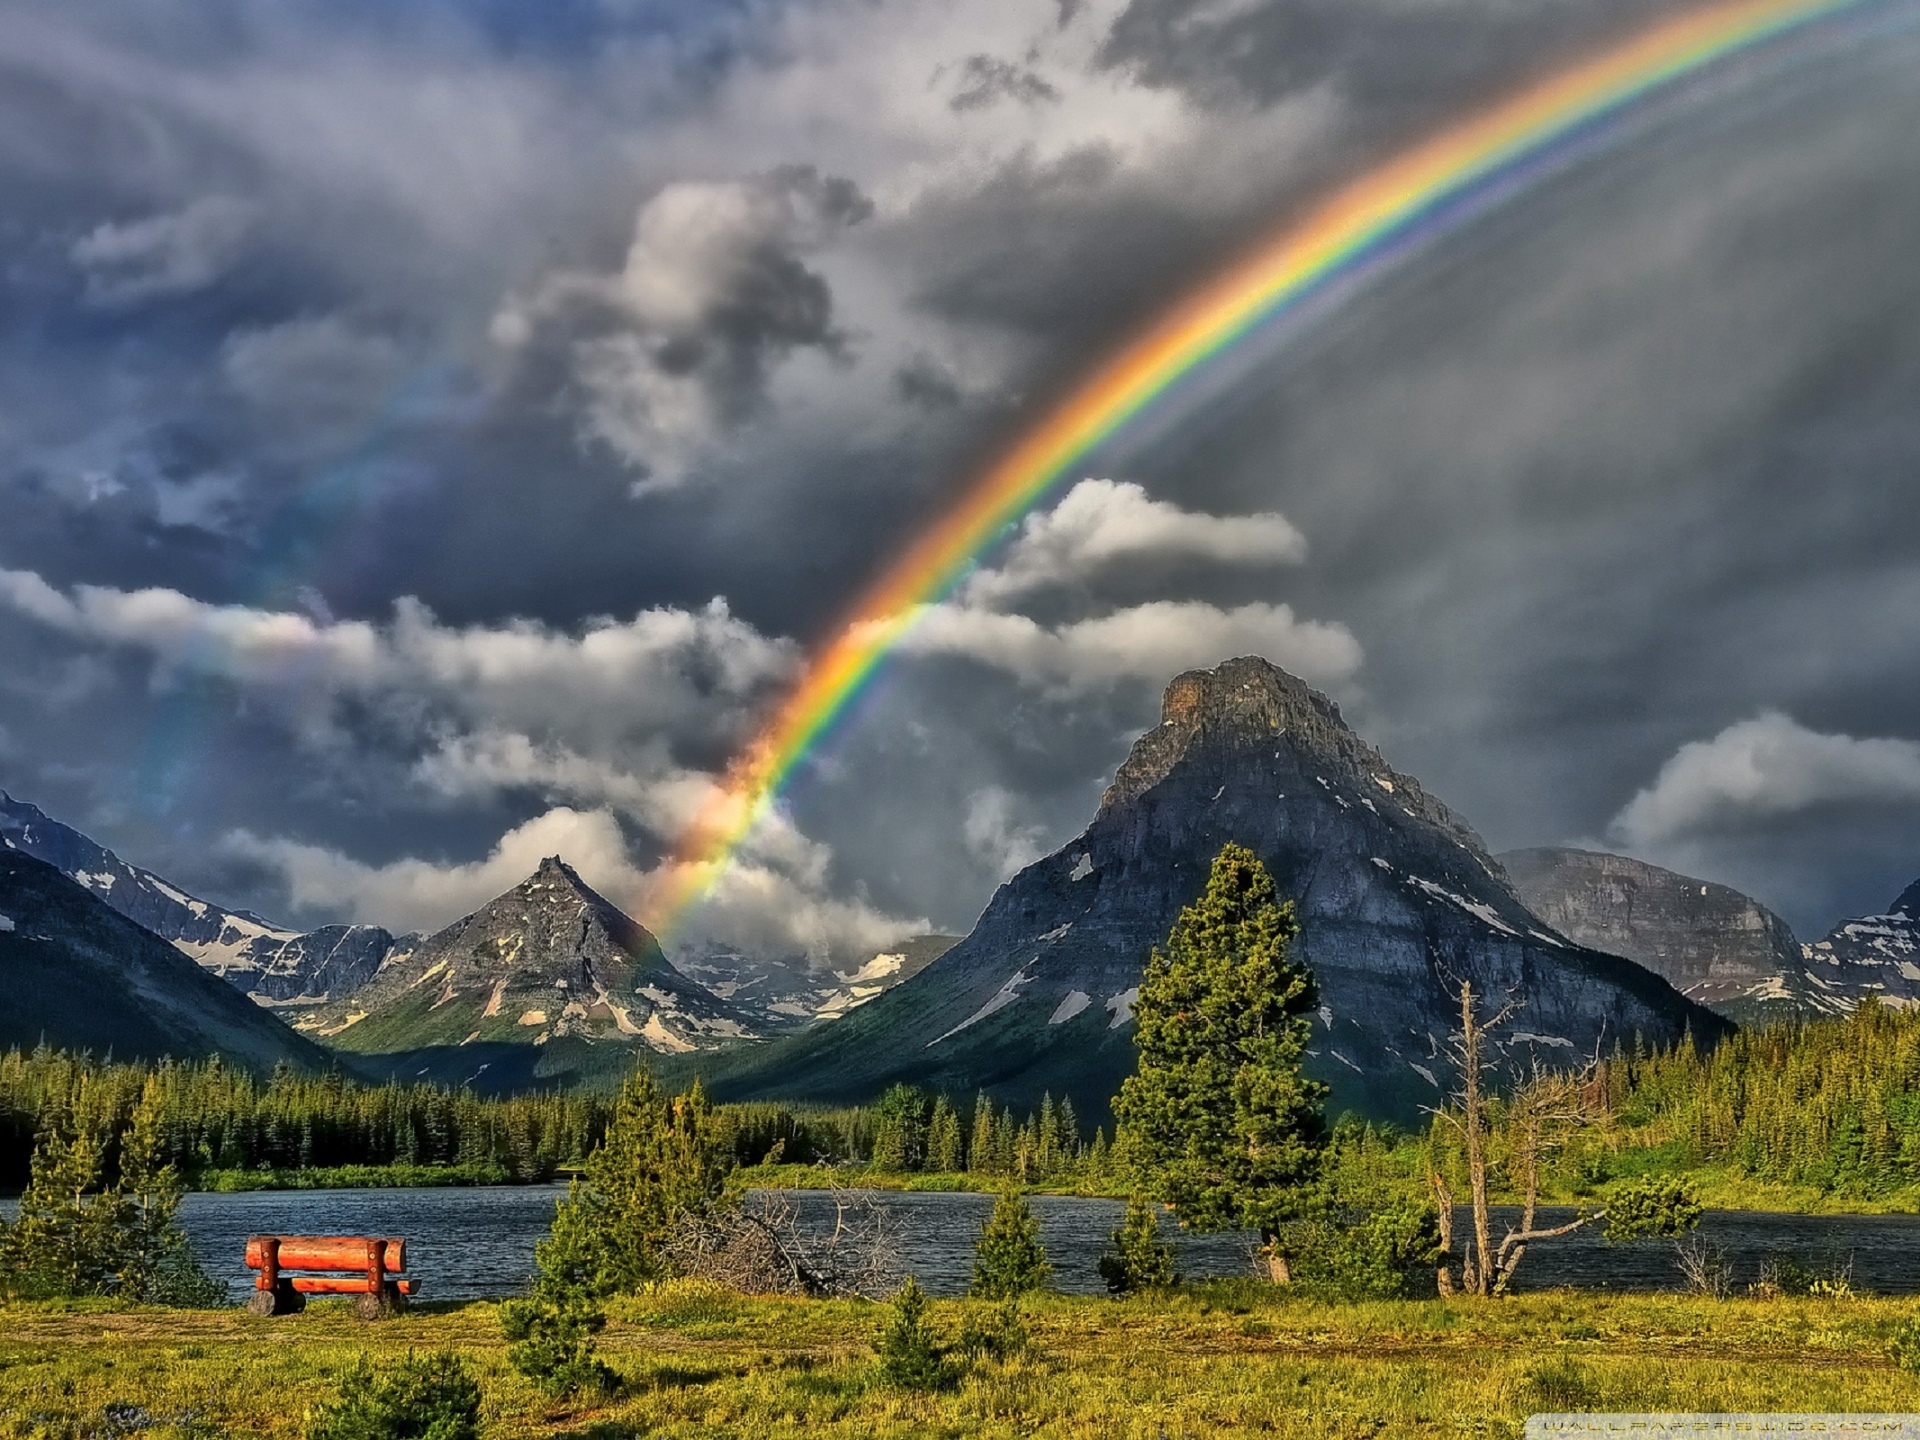 Rainbow In The Sky Ultra HD Desktop Background Wallpaper for 4K UHD TV, Multi Display, Dual Monitor, Tablet